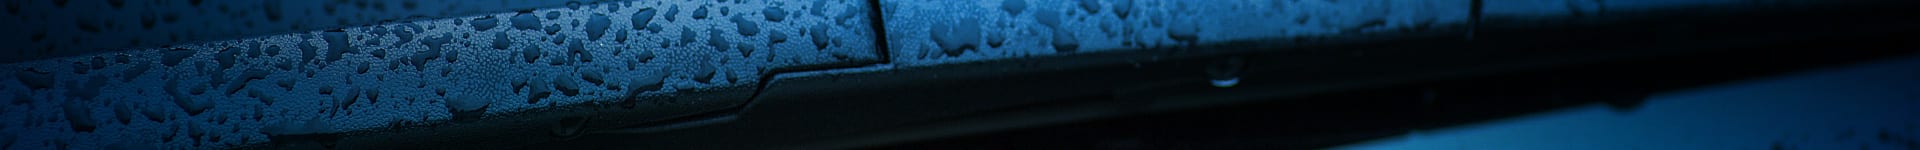 When Rain-X® Original Glass Treatment is removed from the windshield, why does it look like the product is still present?